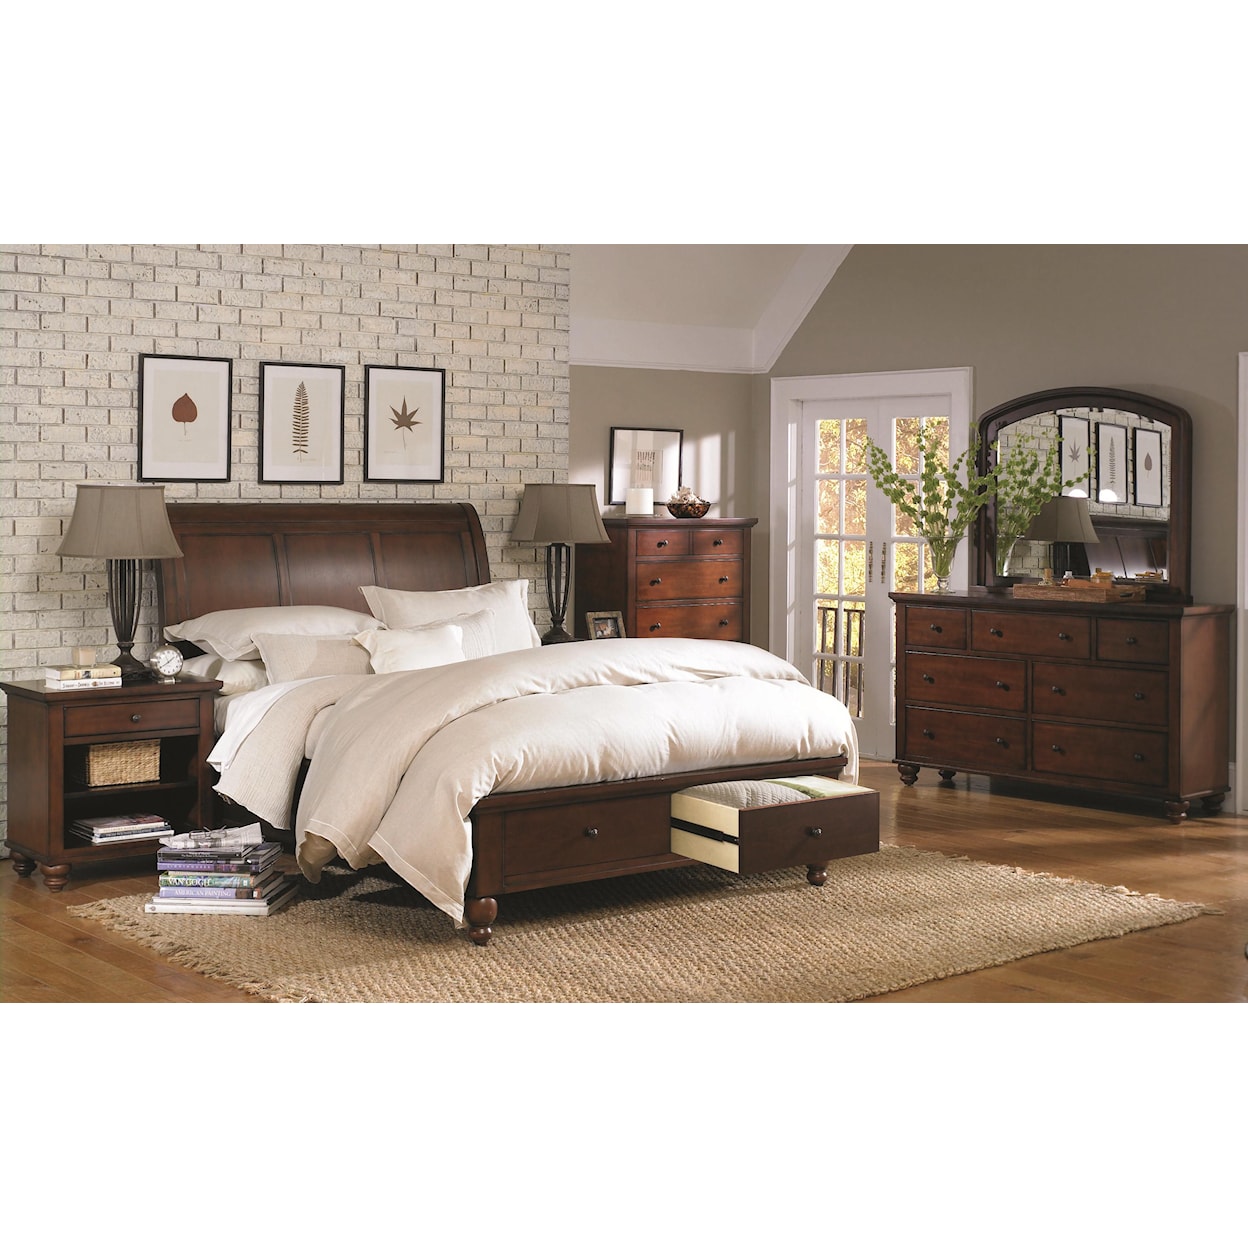 Aspenhome Clinton Clinton King Sleigh Bed with Storage